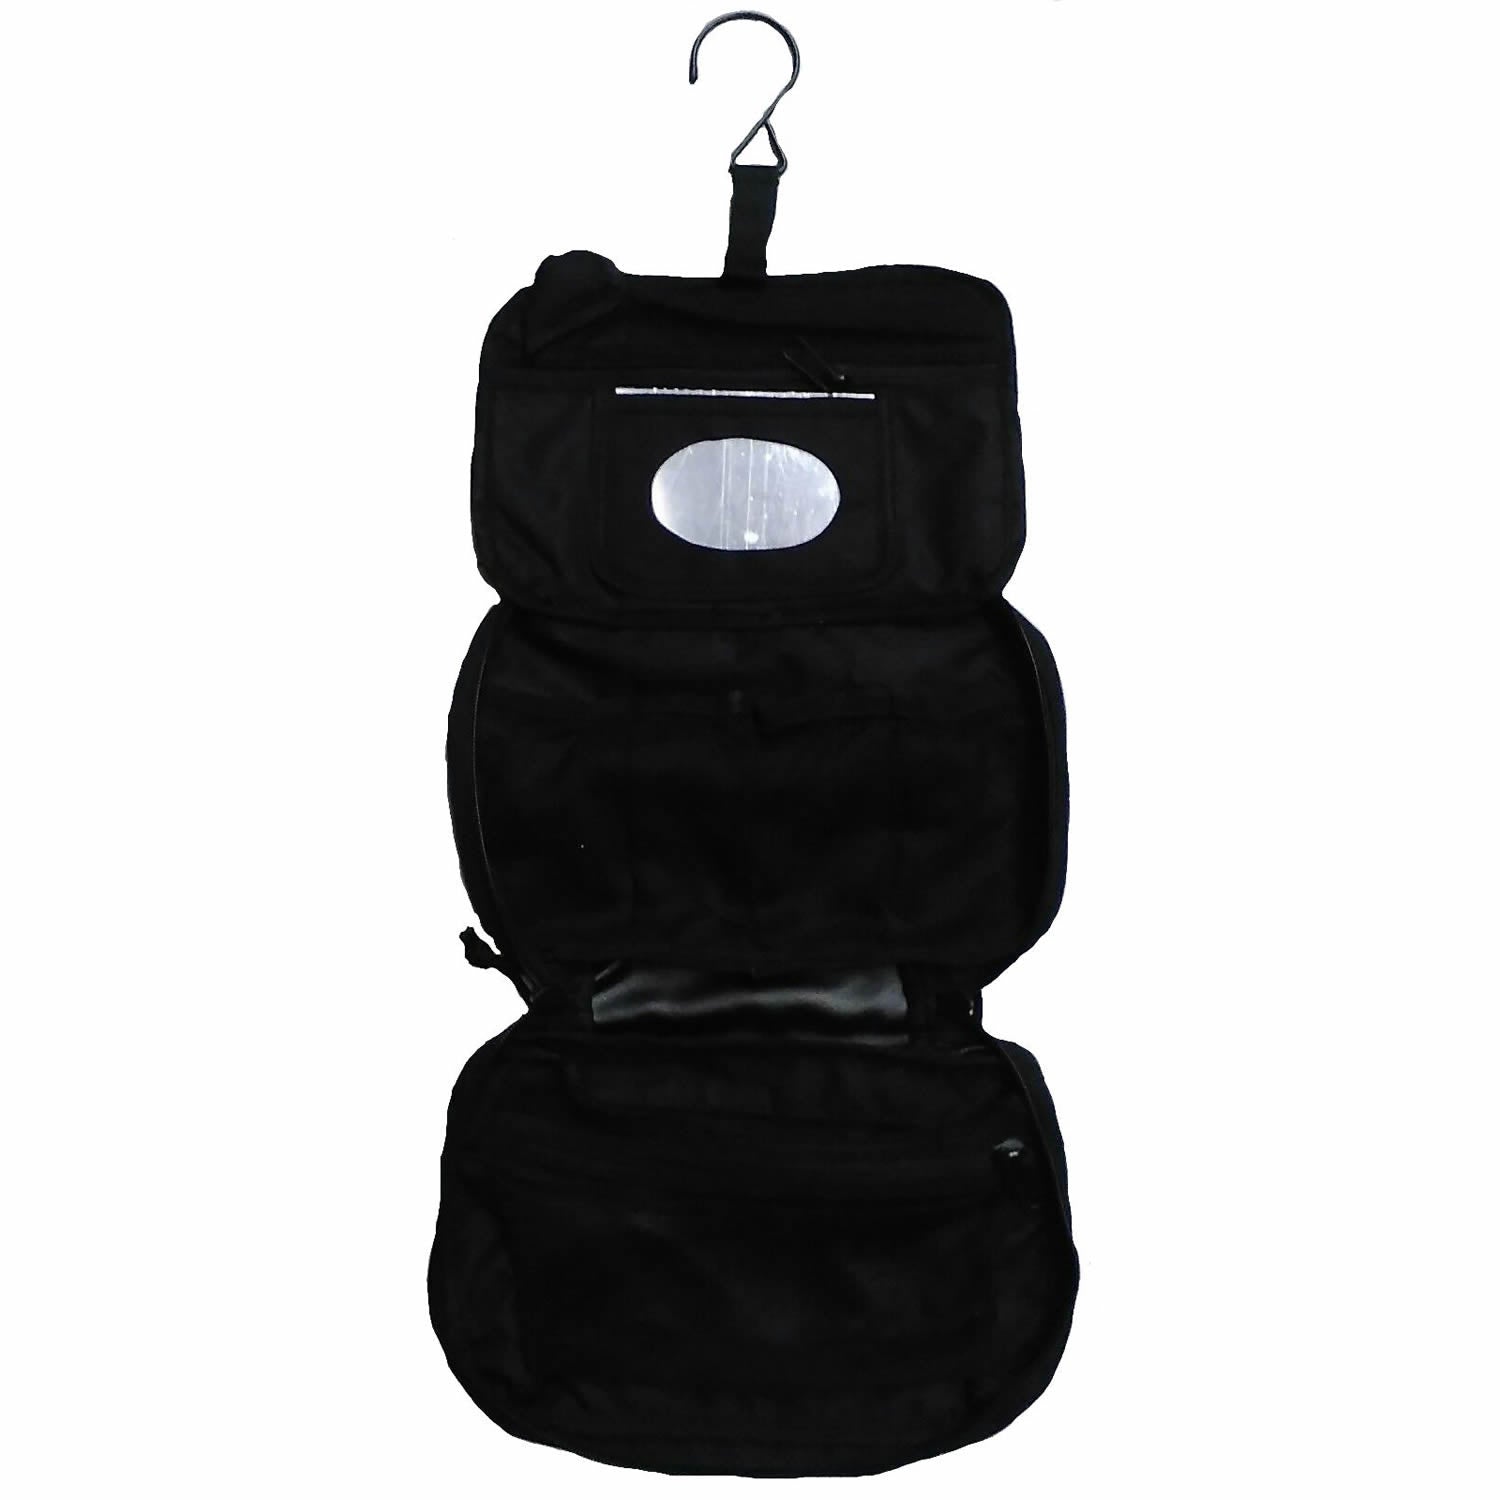 Great for military, cadets, camping and hiking to keep all your personal hygiene requirements together in one pouch  It folds up into a small pouch for travel and storage and can be hung vertically on a tree branch or hootchie cord when in the field so this way you can use the mirror when shaving or putting camo paint on.